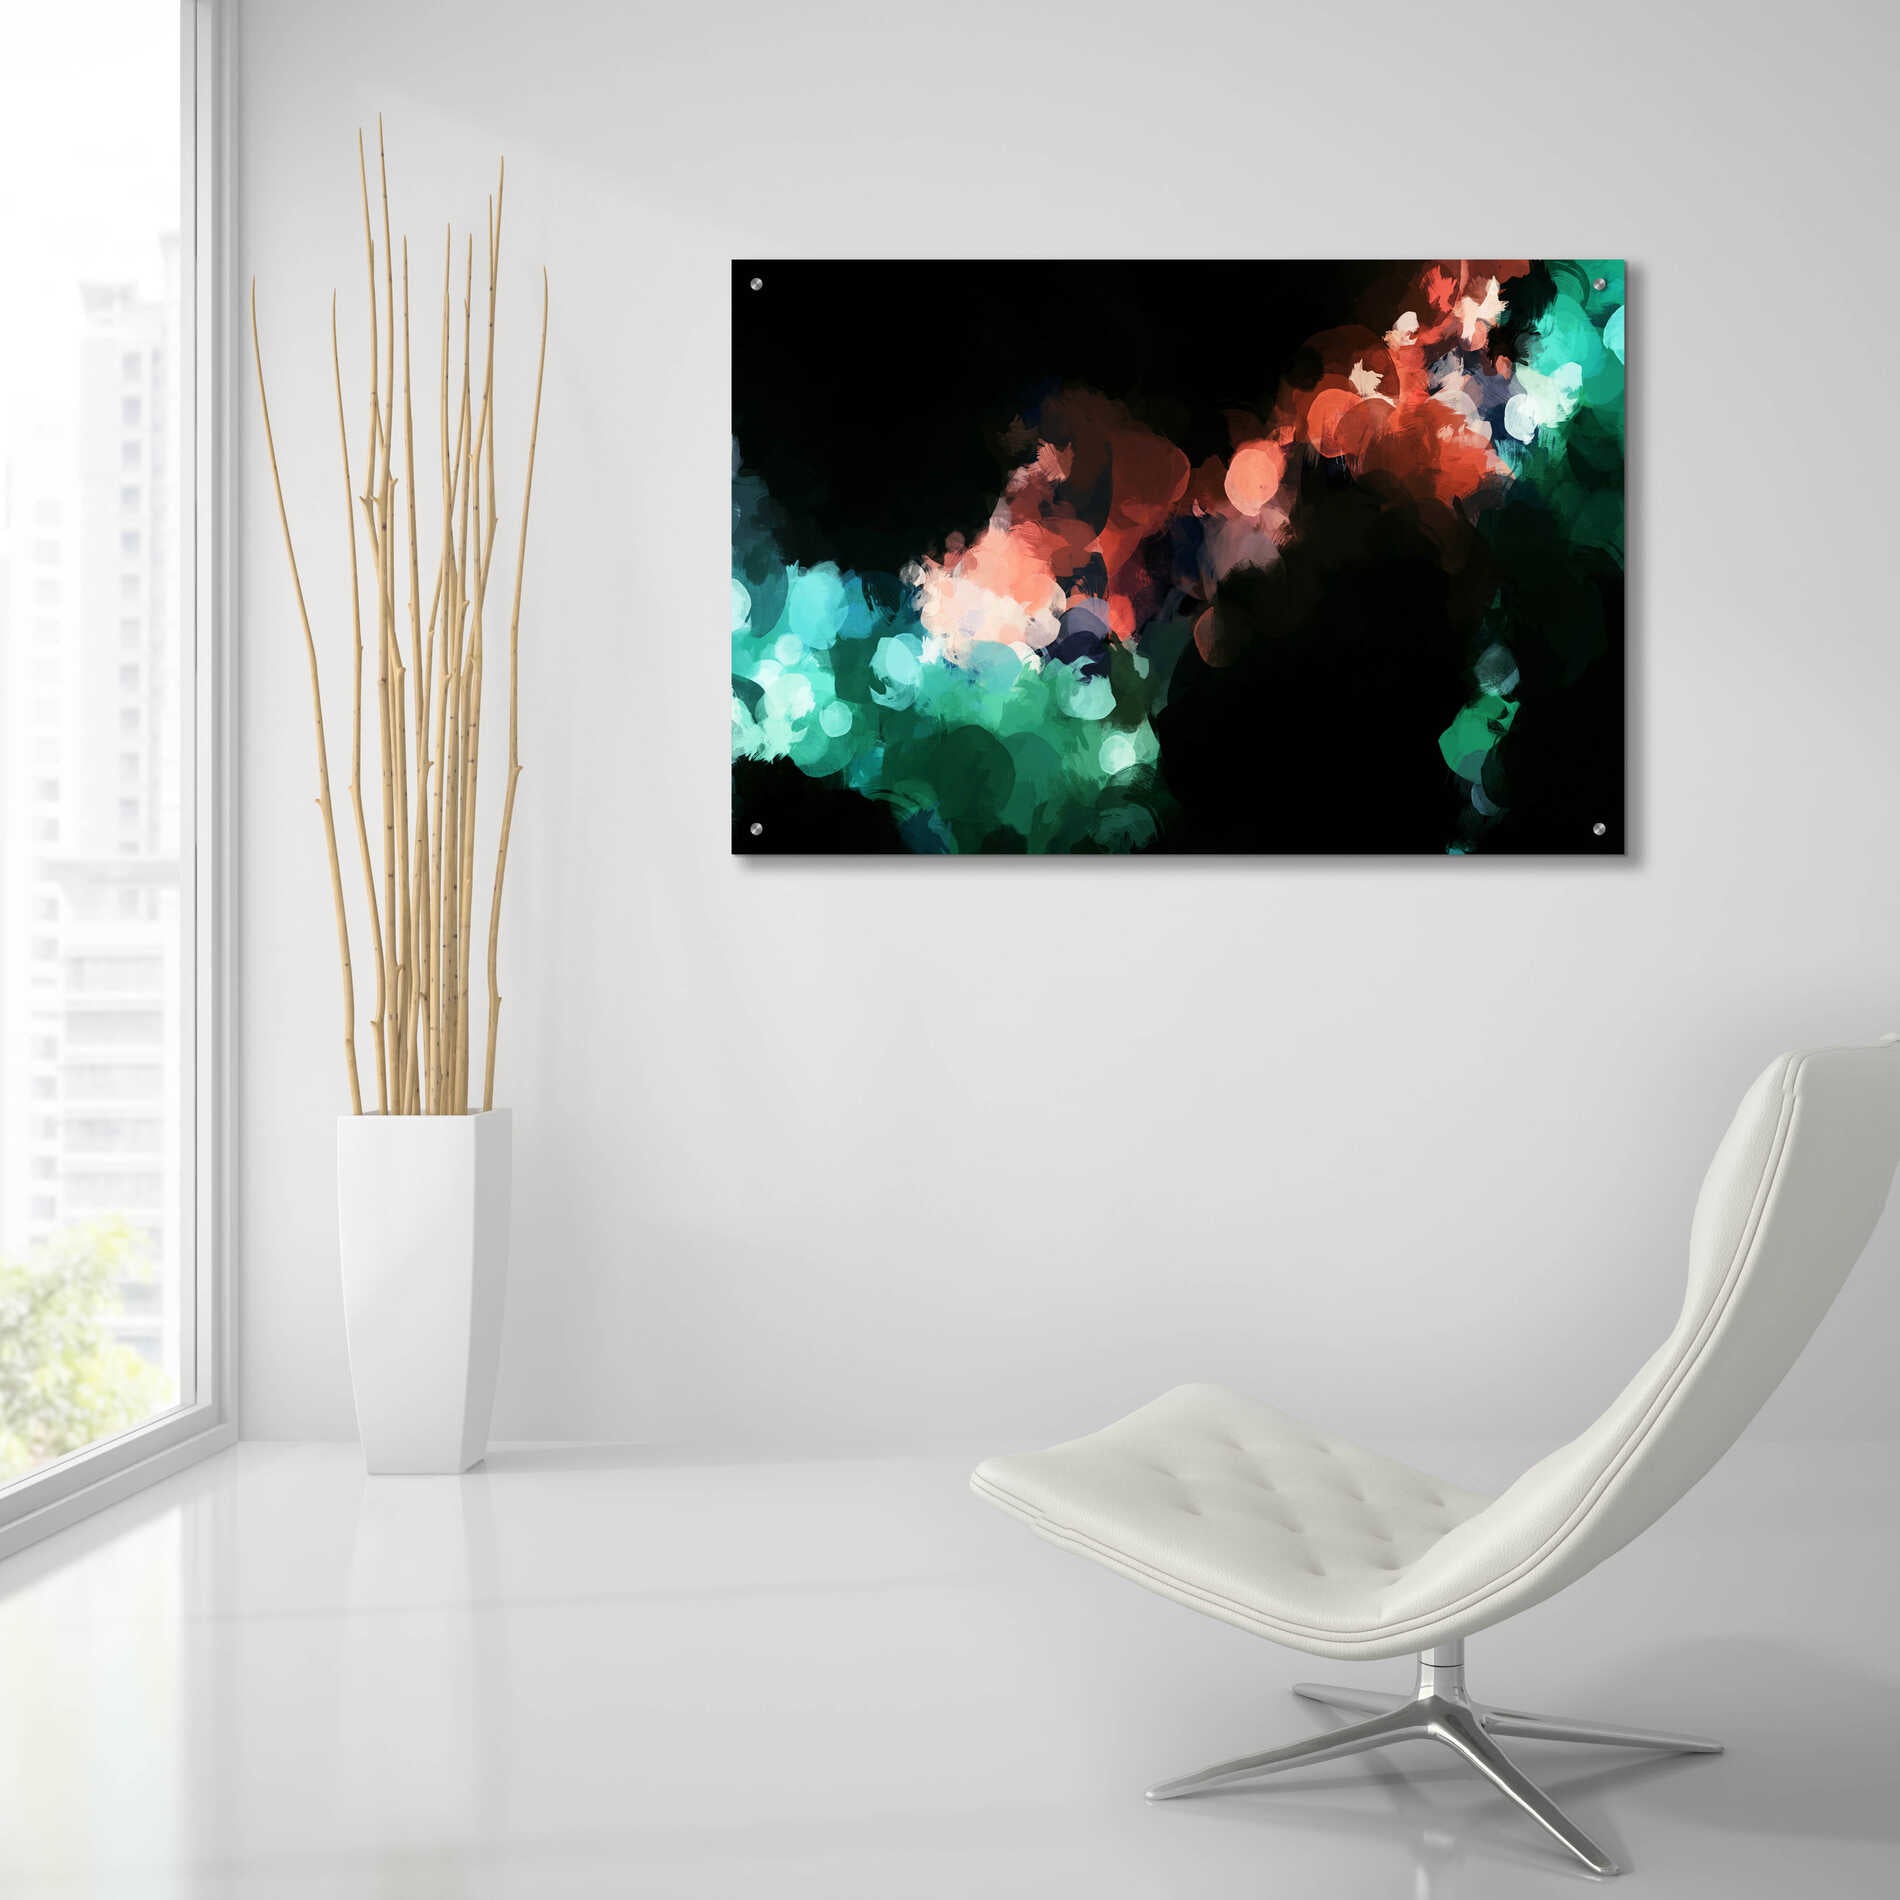 Epic Art 'Inverted Abstract Colorful Flows 17' by Irena Orlov Acrylic Glass Wall Art,36x24